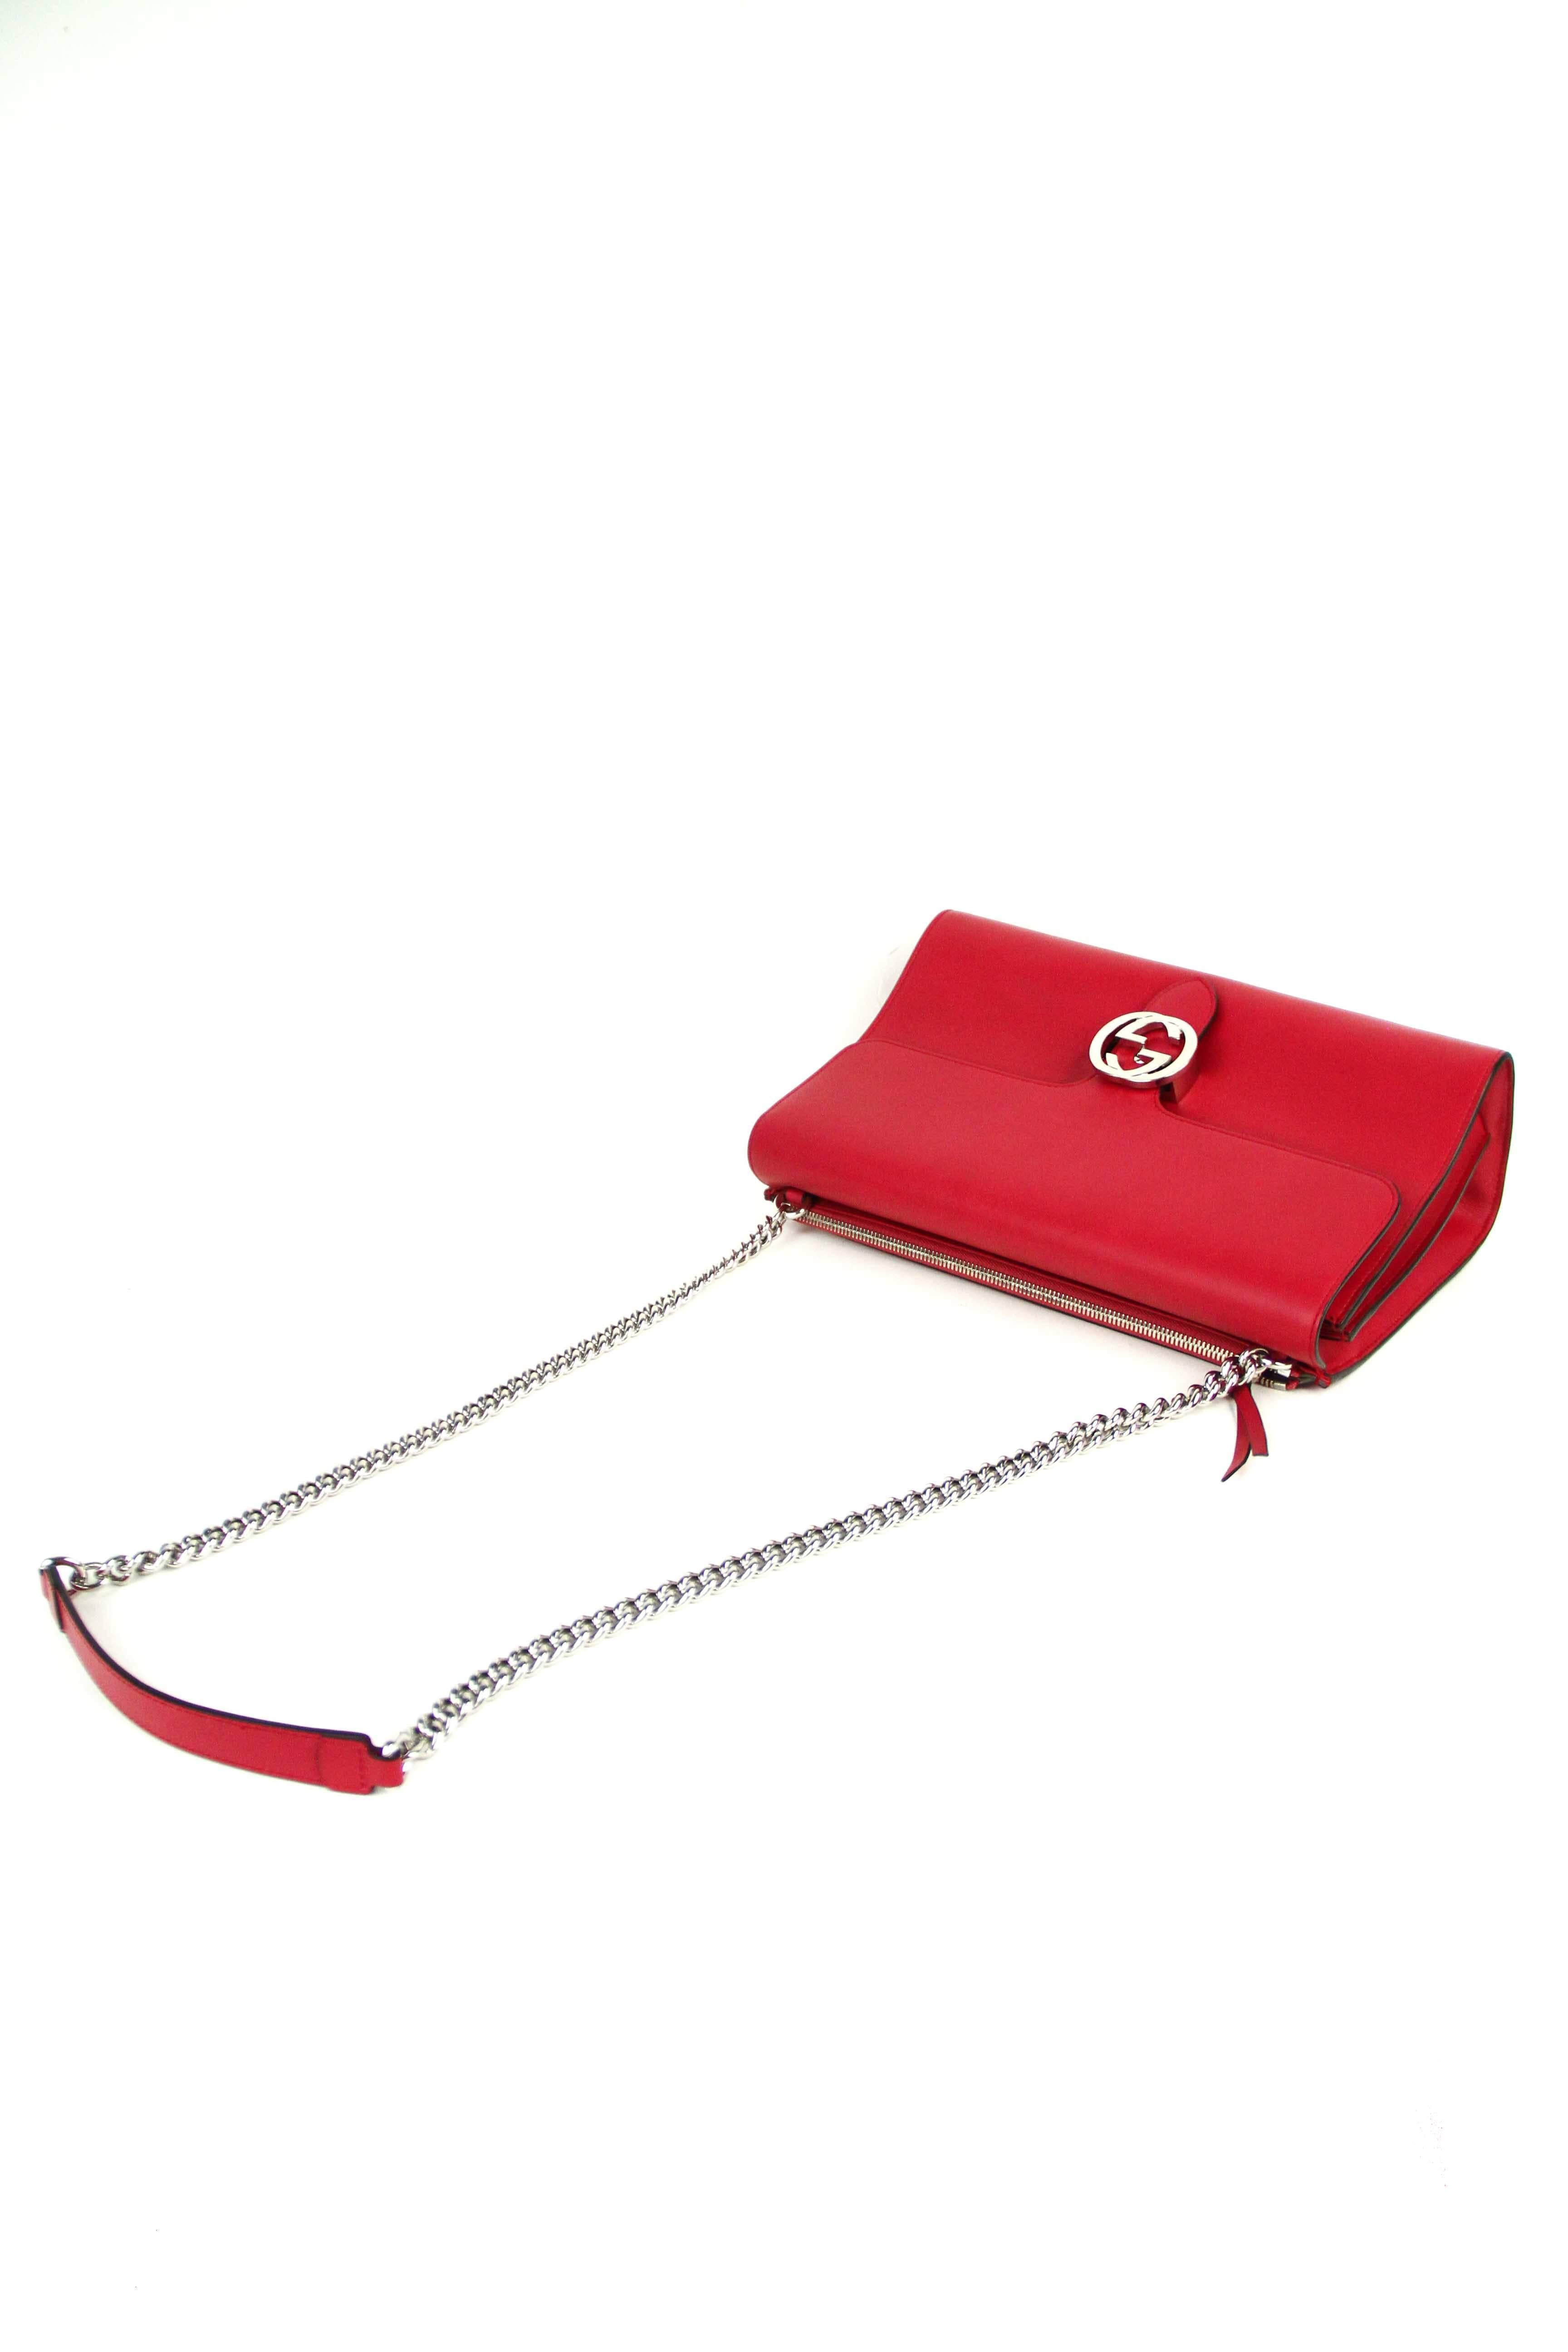 Offered is a new pre-owned never used Gucci Linea B handbag in supple red calfskin. Silver tone chain handles with flat leather at shoulders , and interlocking  GG logo clasp on front tab.  Interior slips pockets and zip pocket, with a full length